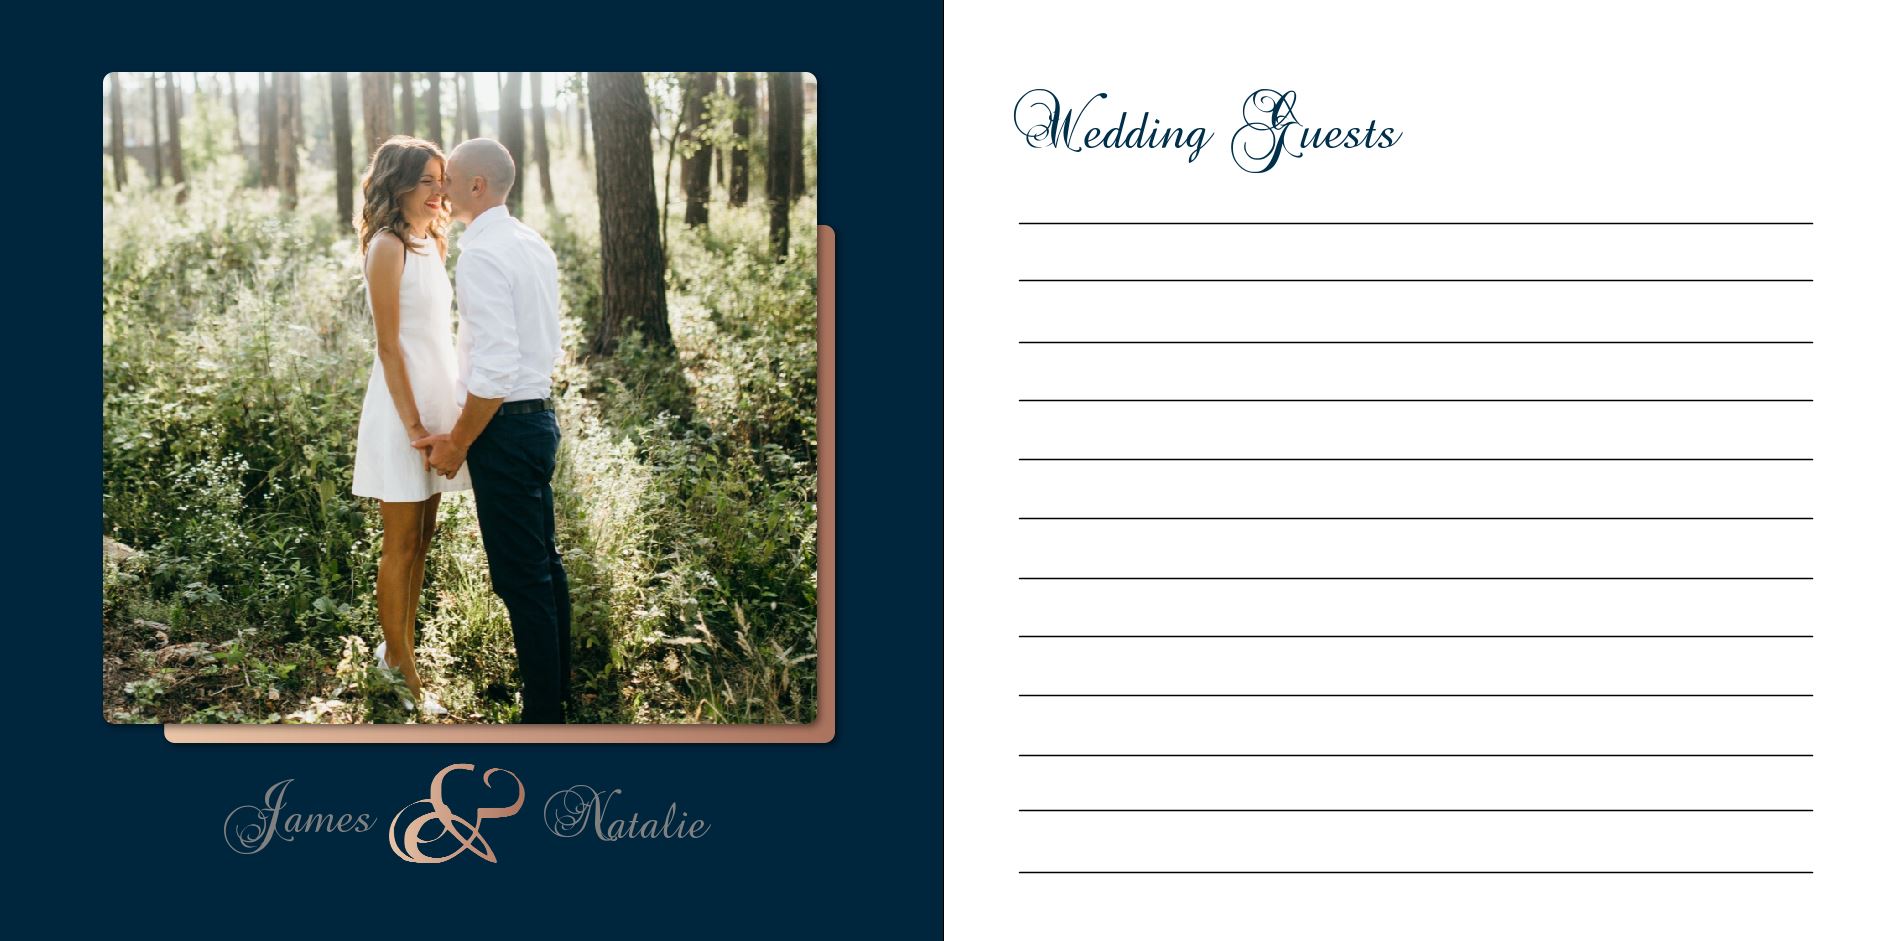 Photo Book - Rose and Navy Wedding Guestbook square 2-3